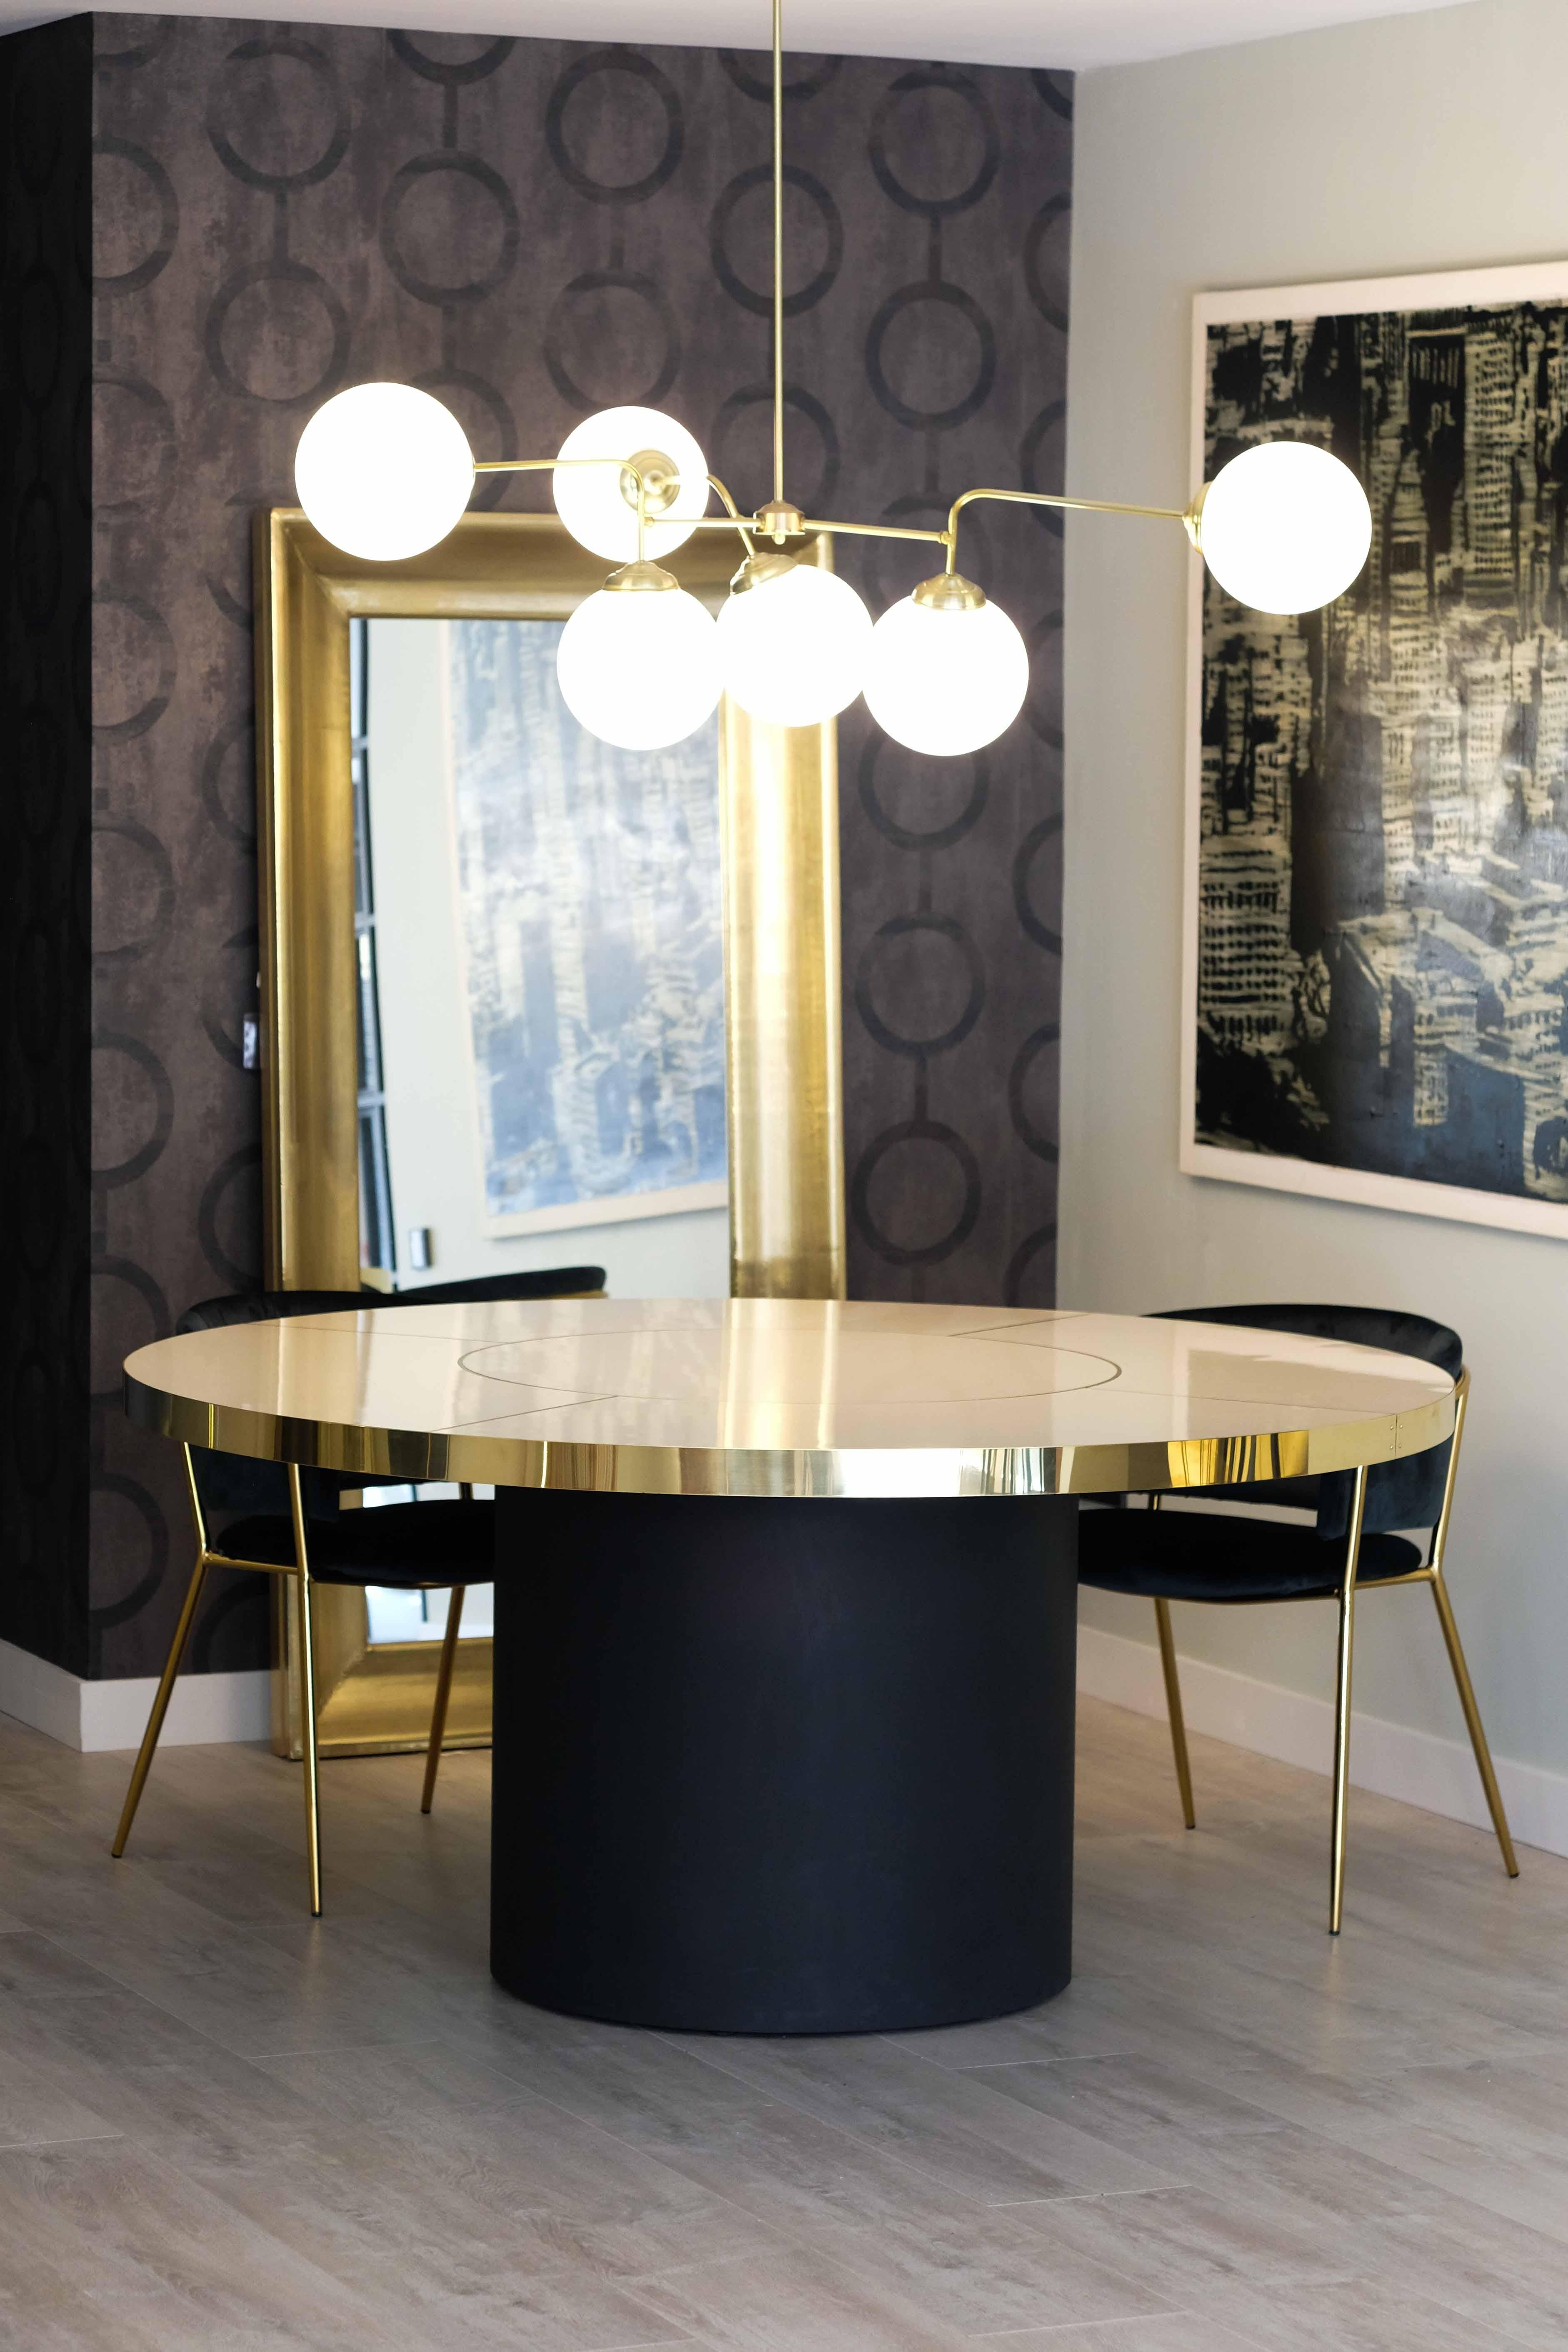 Retro Design Round Dining Table Palm Springs Style High Gloss Laminated & Brass Details Large Size

Discover our incredible collection of retro-style design tables inspired by the iconic decoration of the 1950s, 60s, and 70s of Palm Springs in